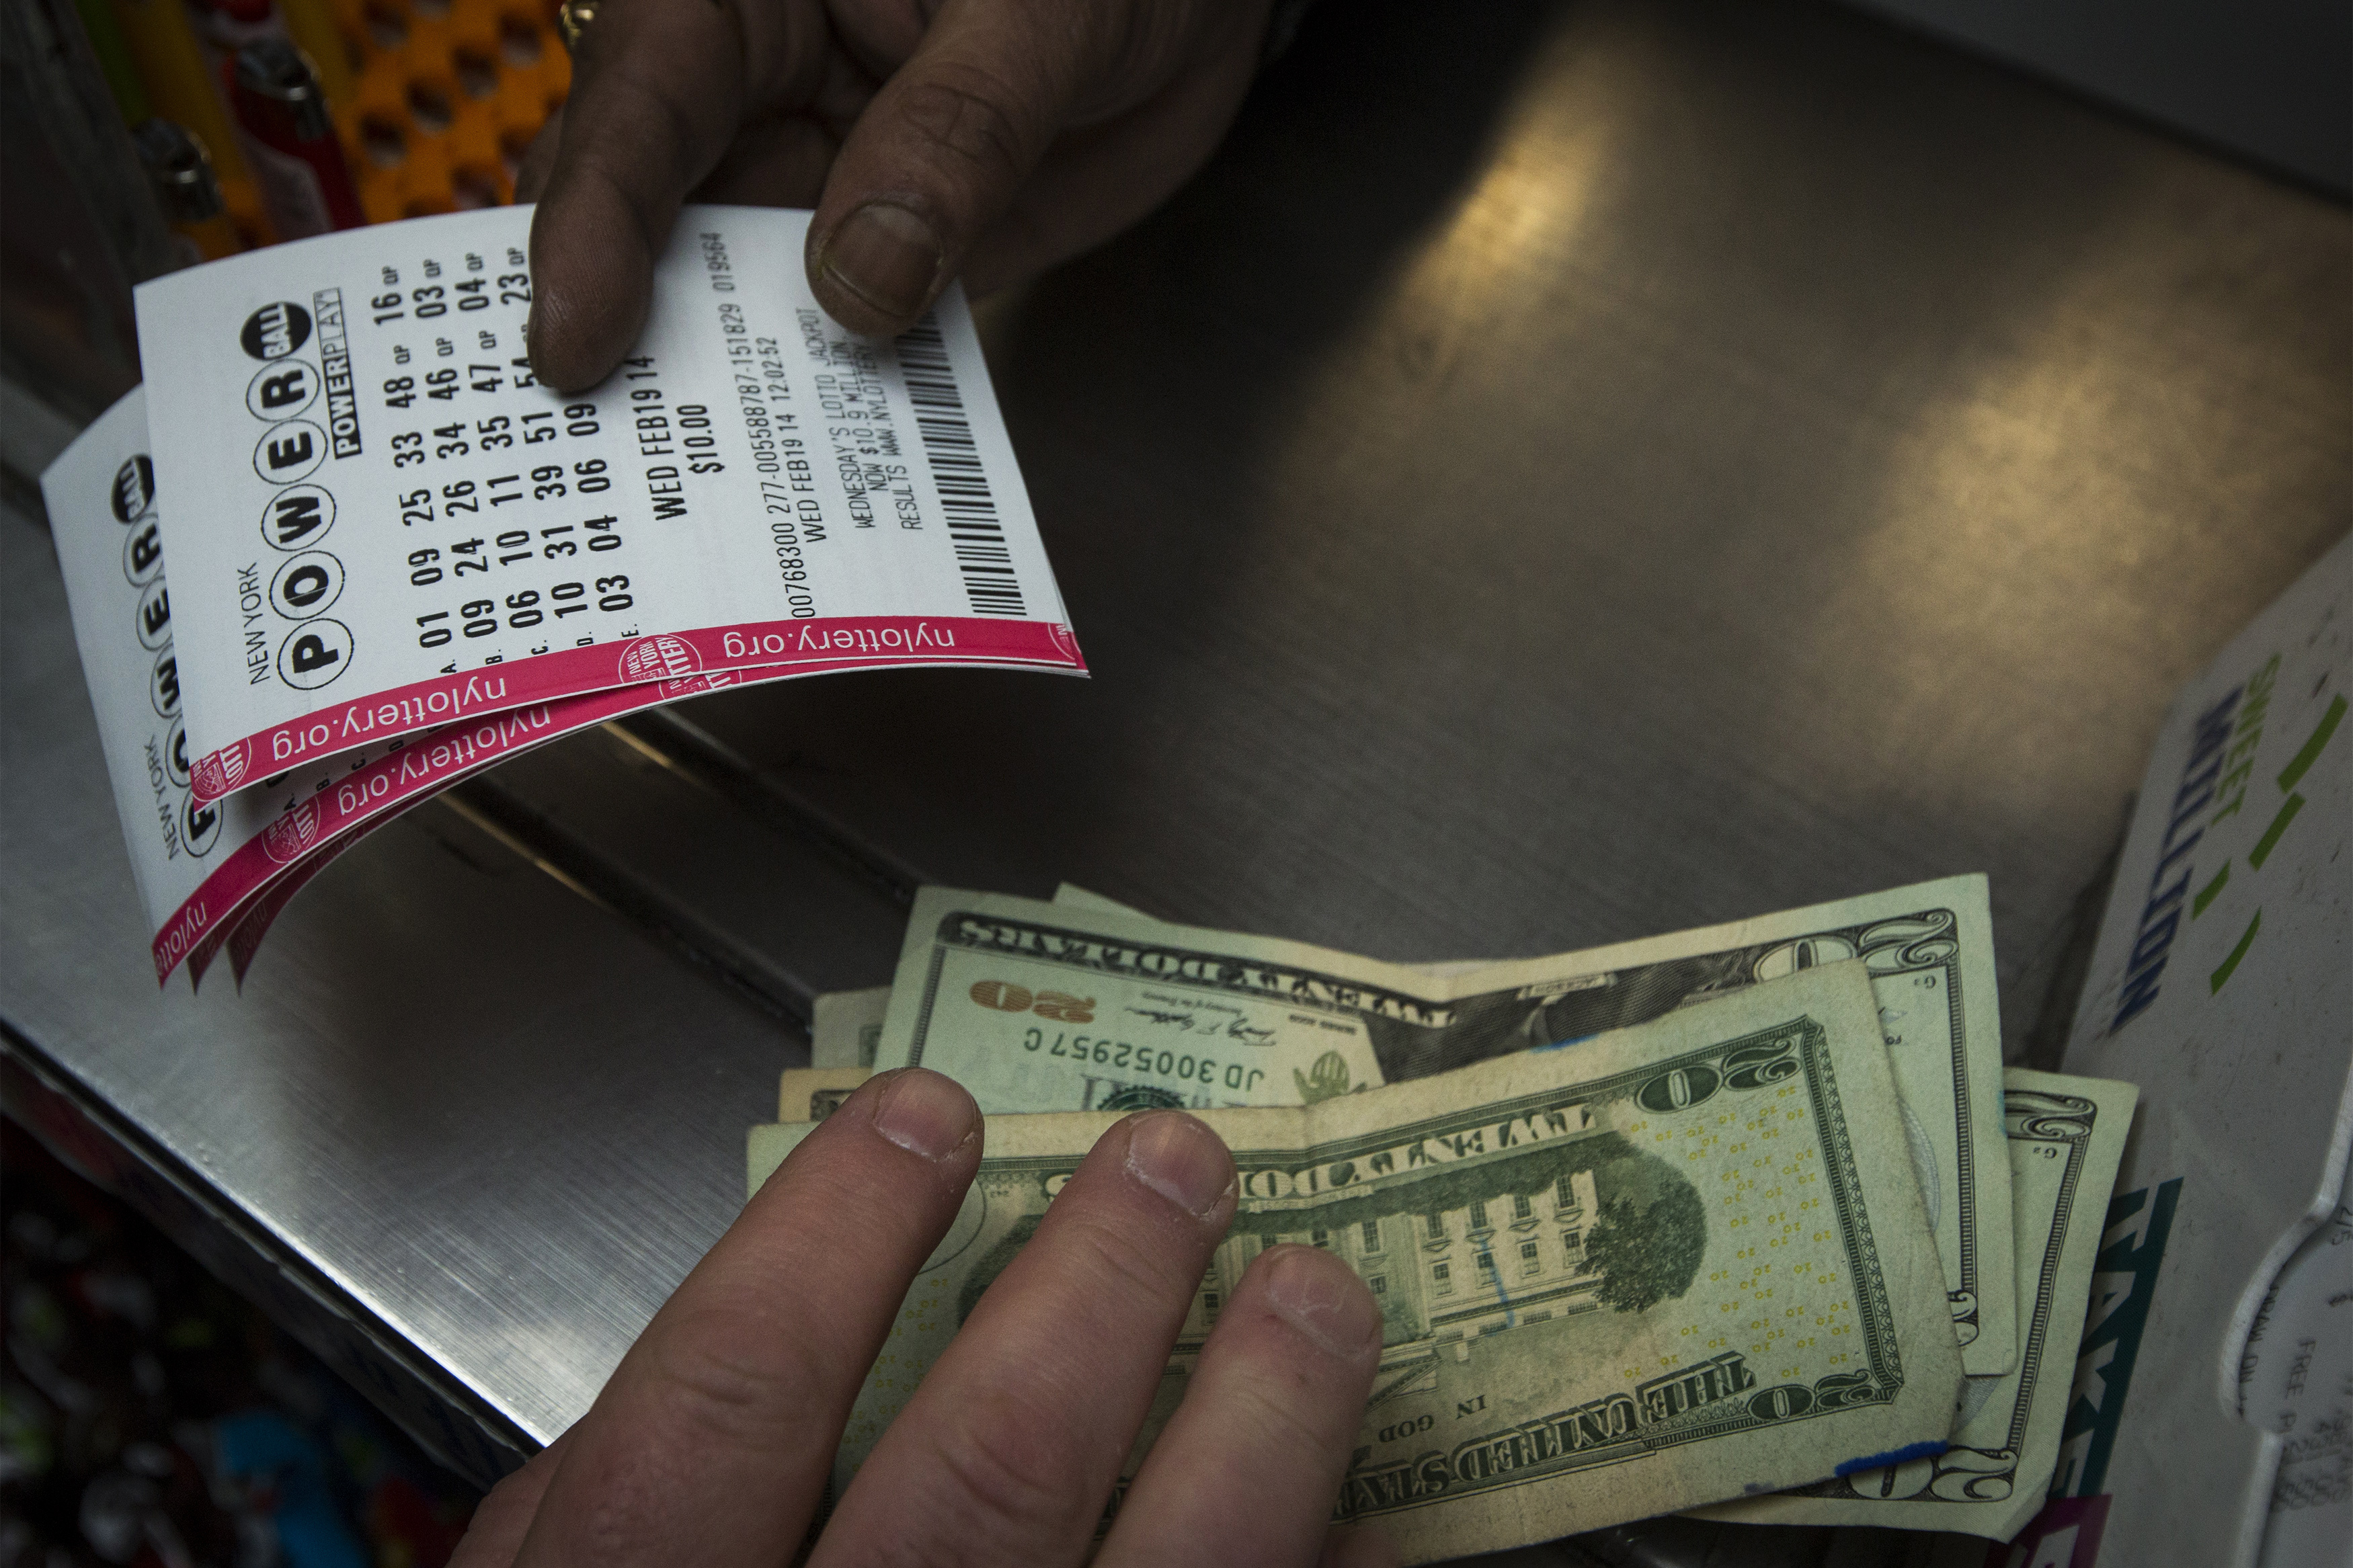 A man purchases New York State Lottery tickets. (© Brendan McDermid / Reuters&mdash;REUTERS)